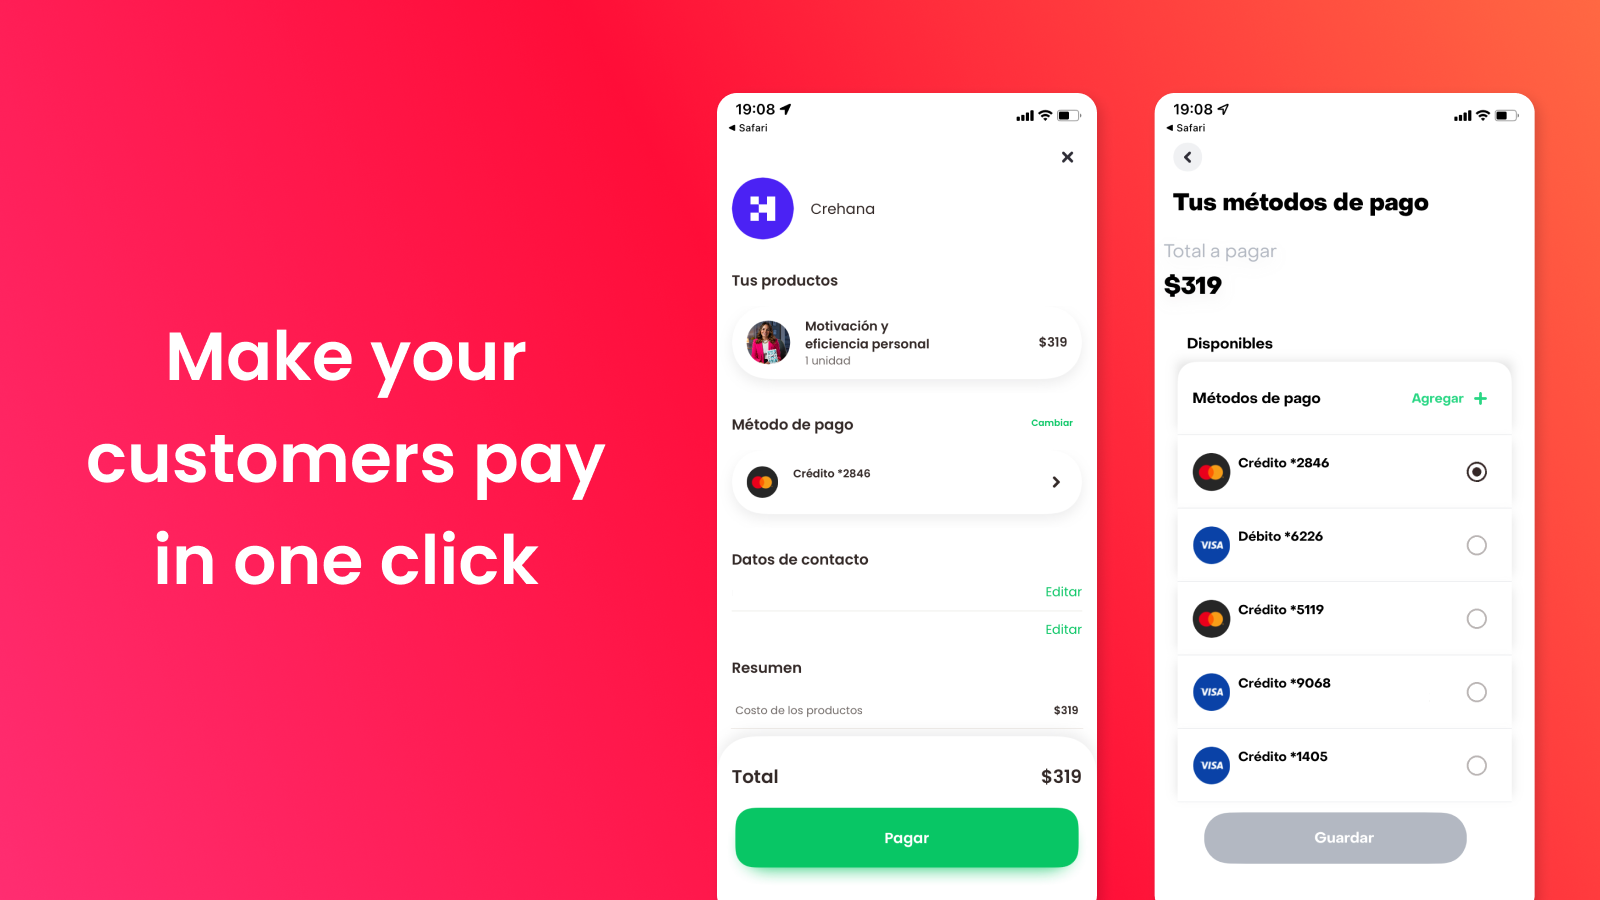 Make your customers pay in one click